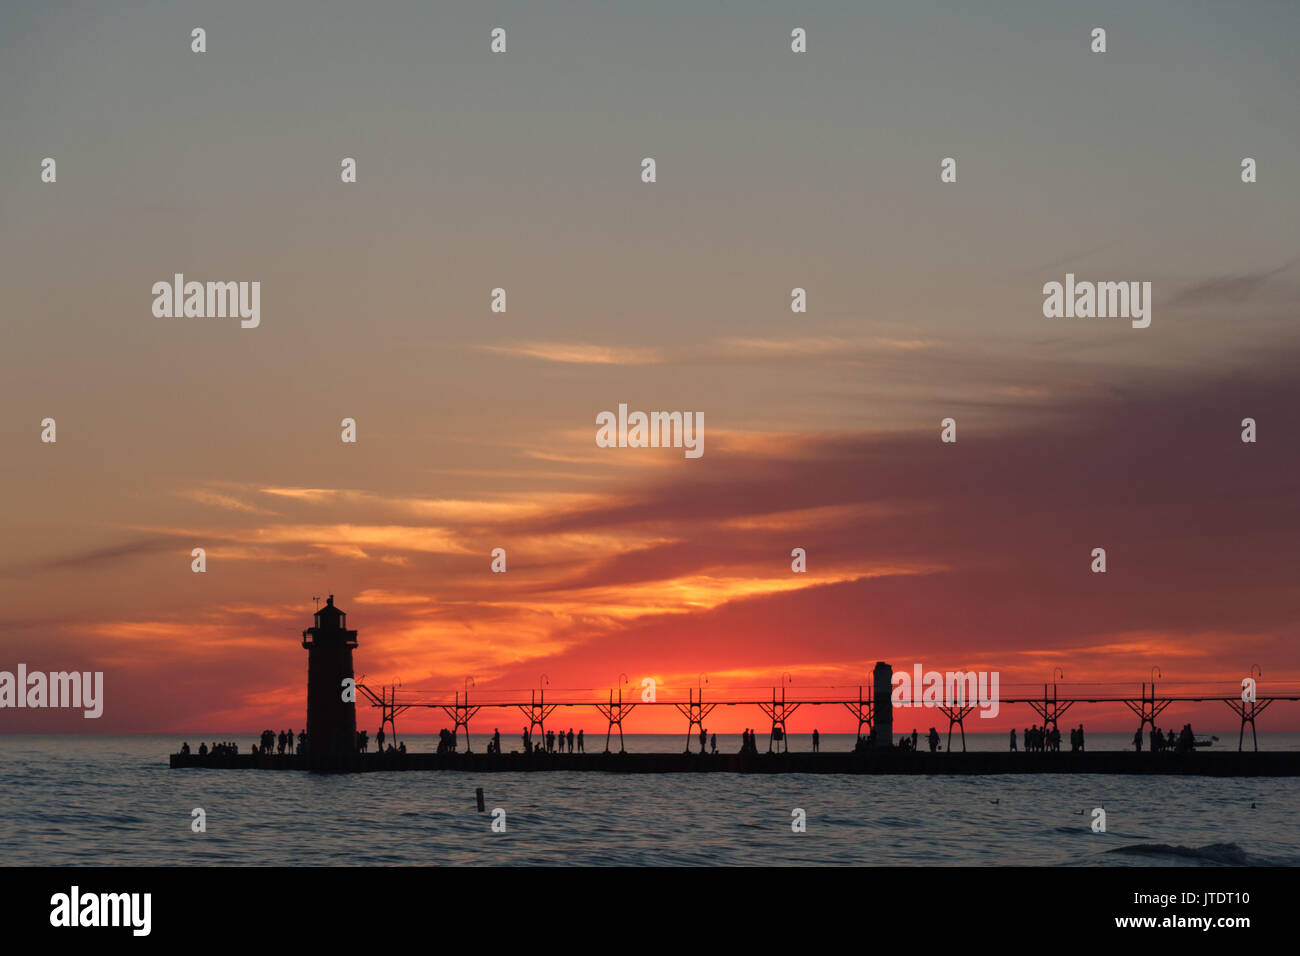 Dramatic view of lighthouse and pier at sunset, South Haven, Michigan. Stock Photo